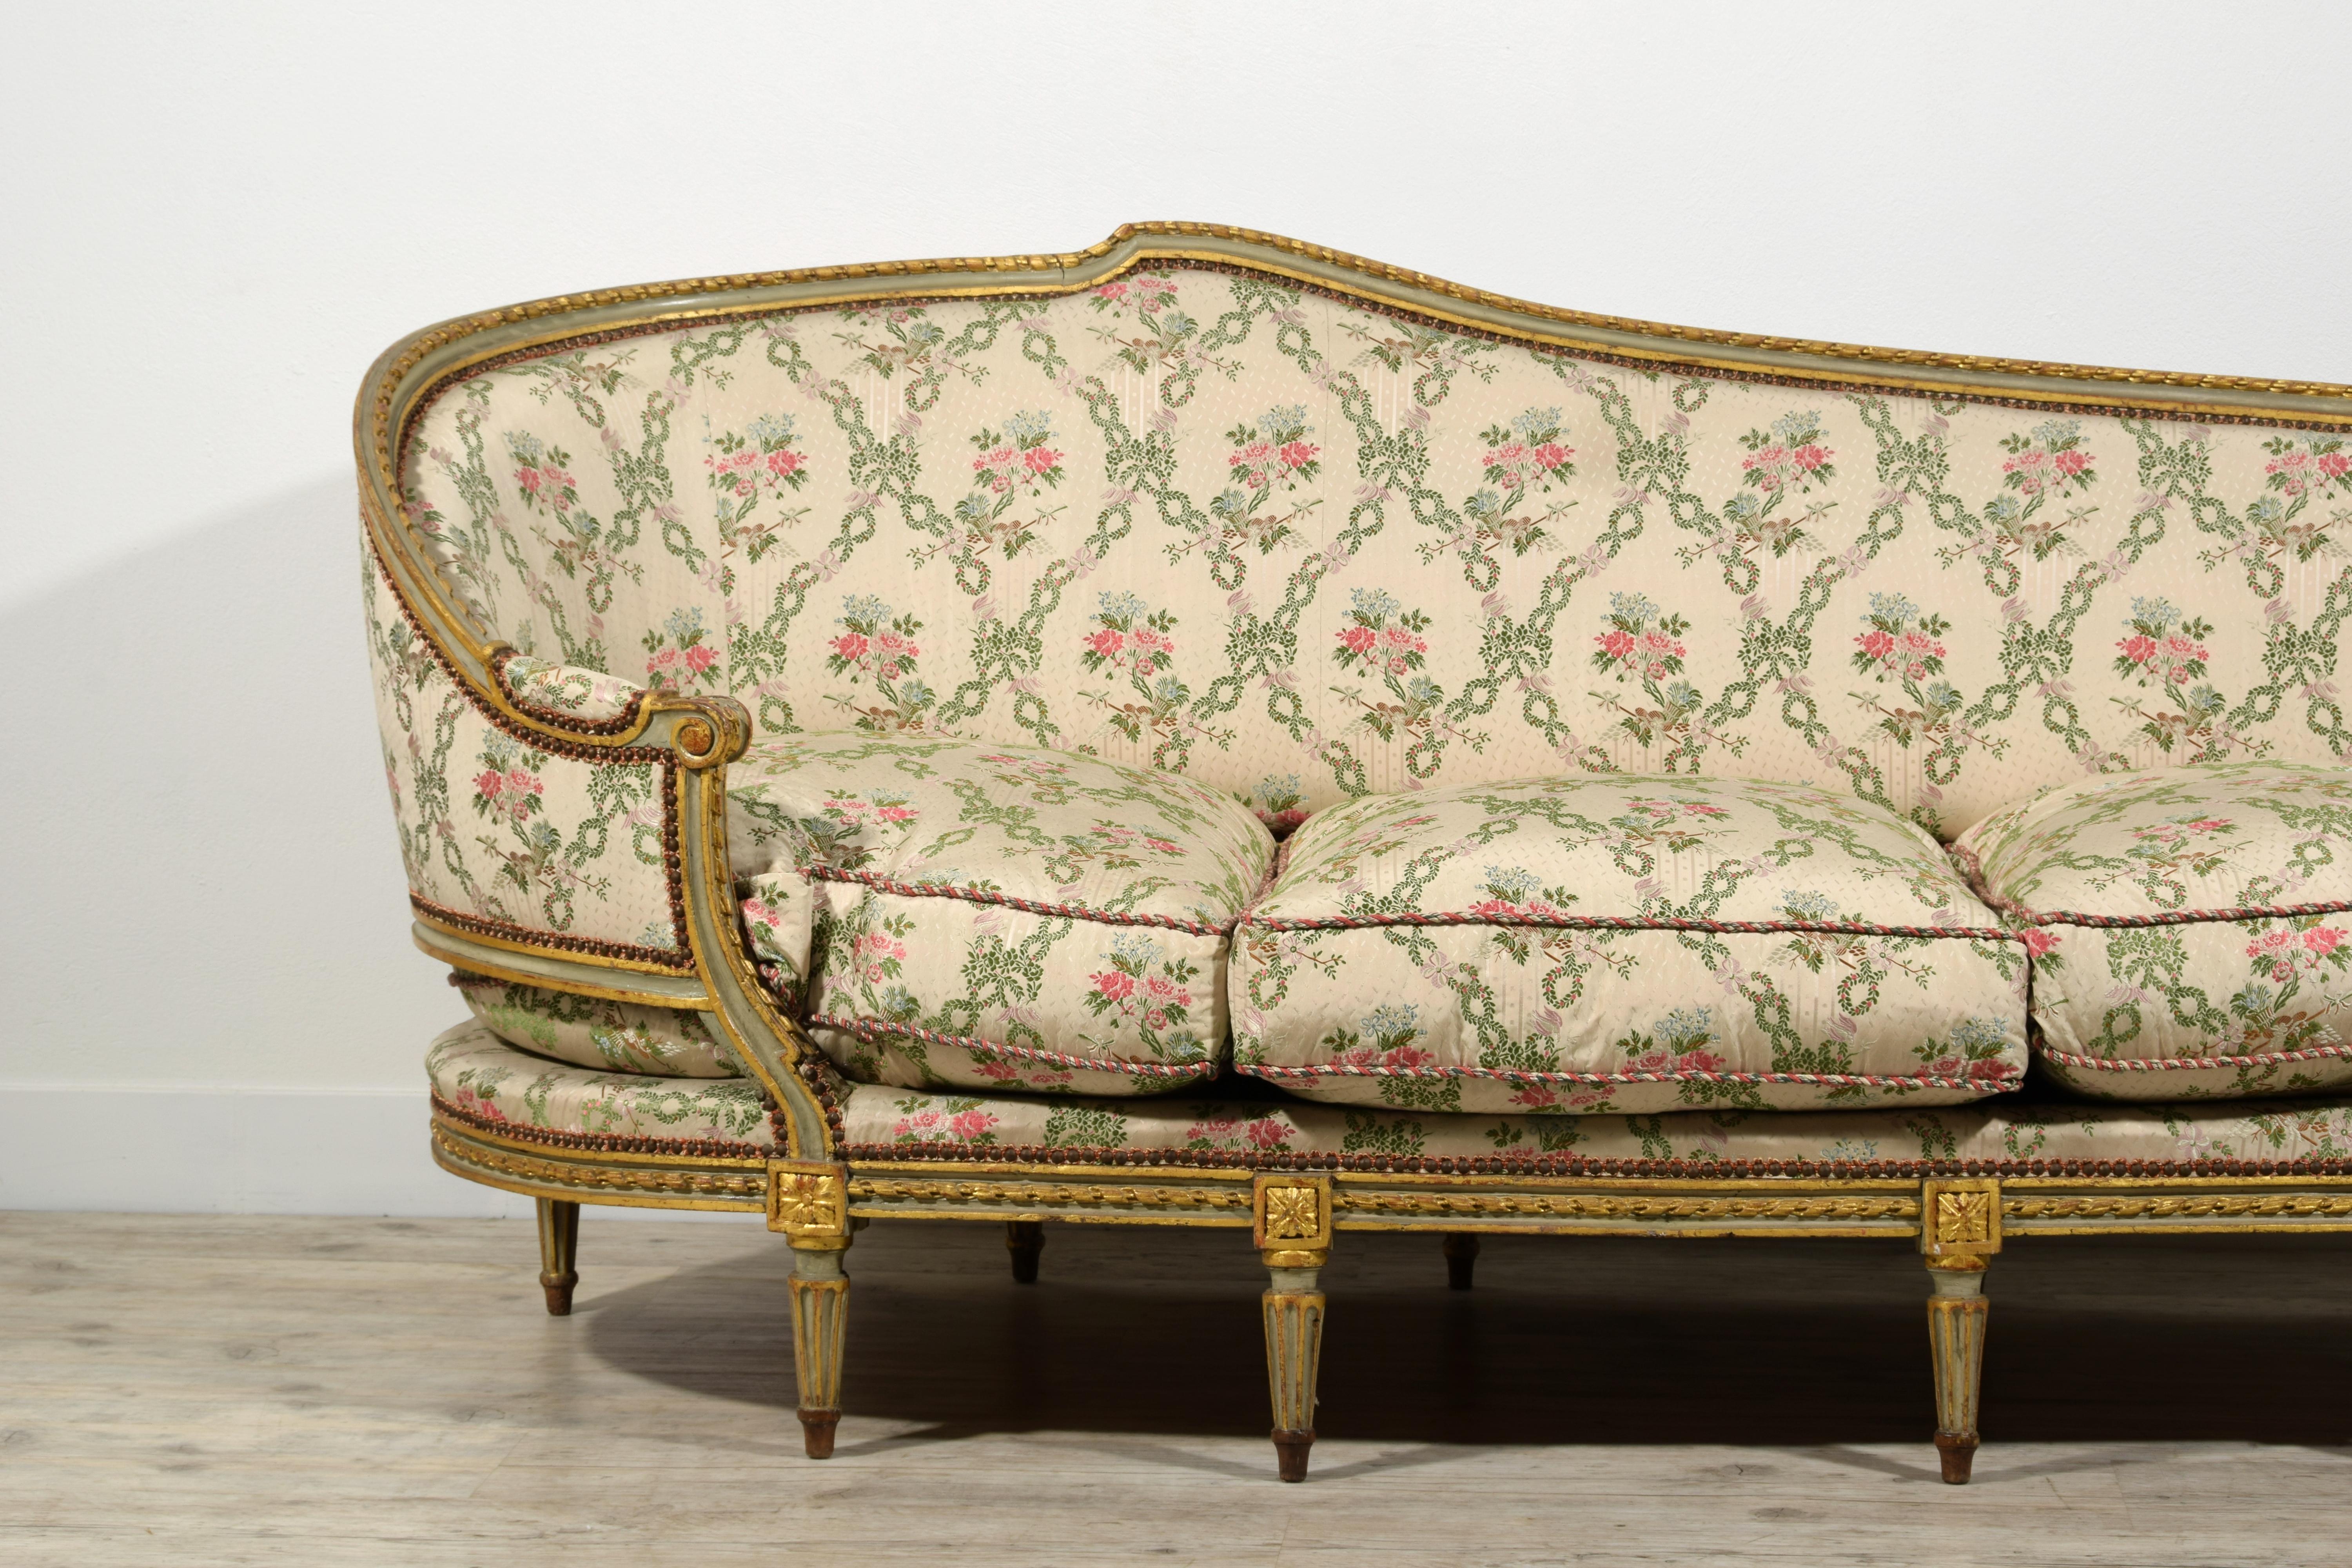 Hand-Carved 18th Century, French Laquered Giltwood Louis XVI Sofa by Pierre Nicolas Pillot